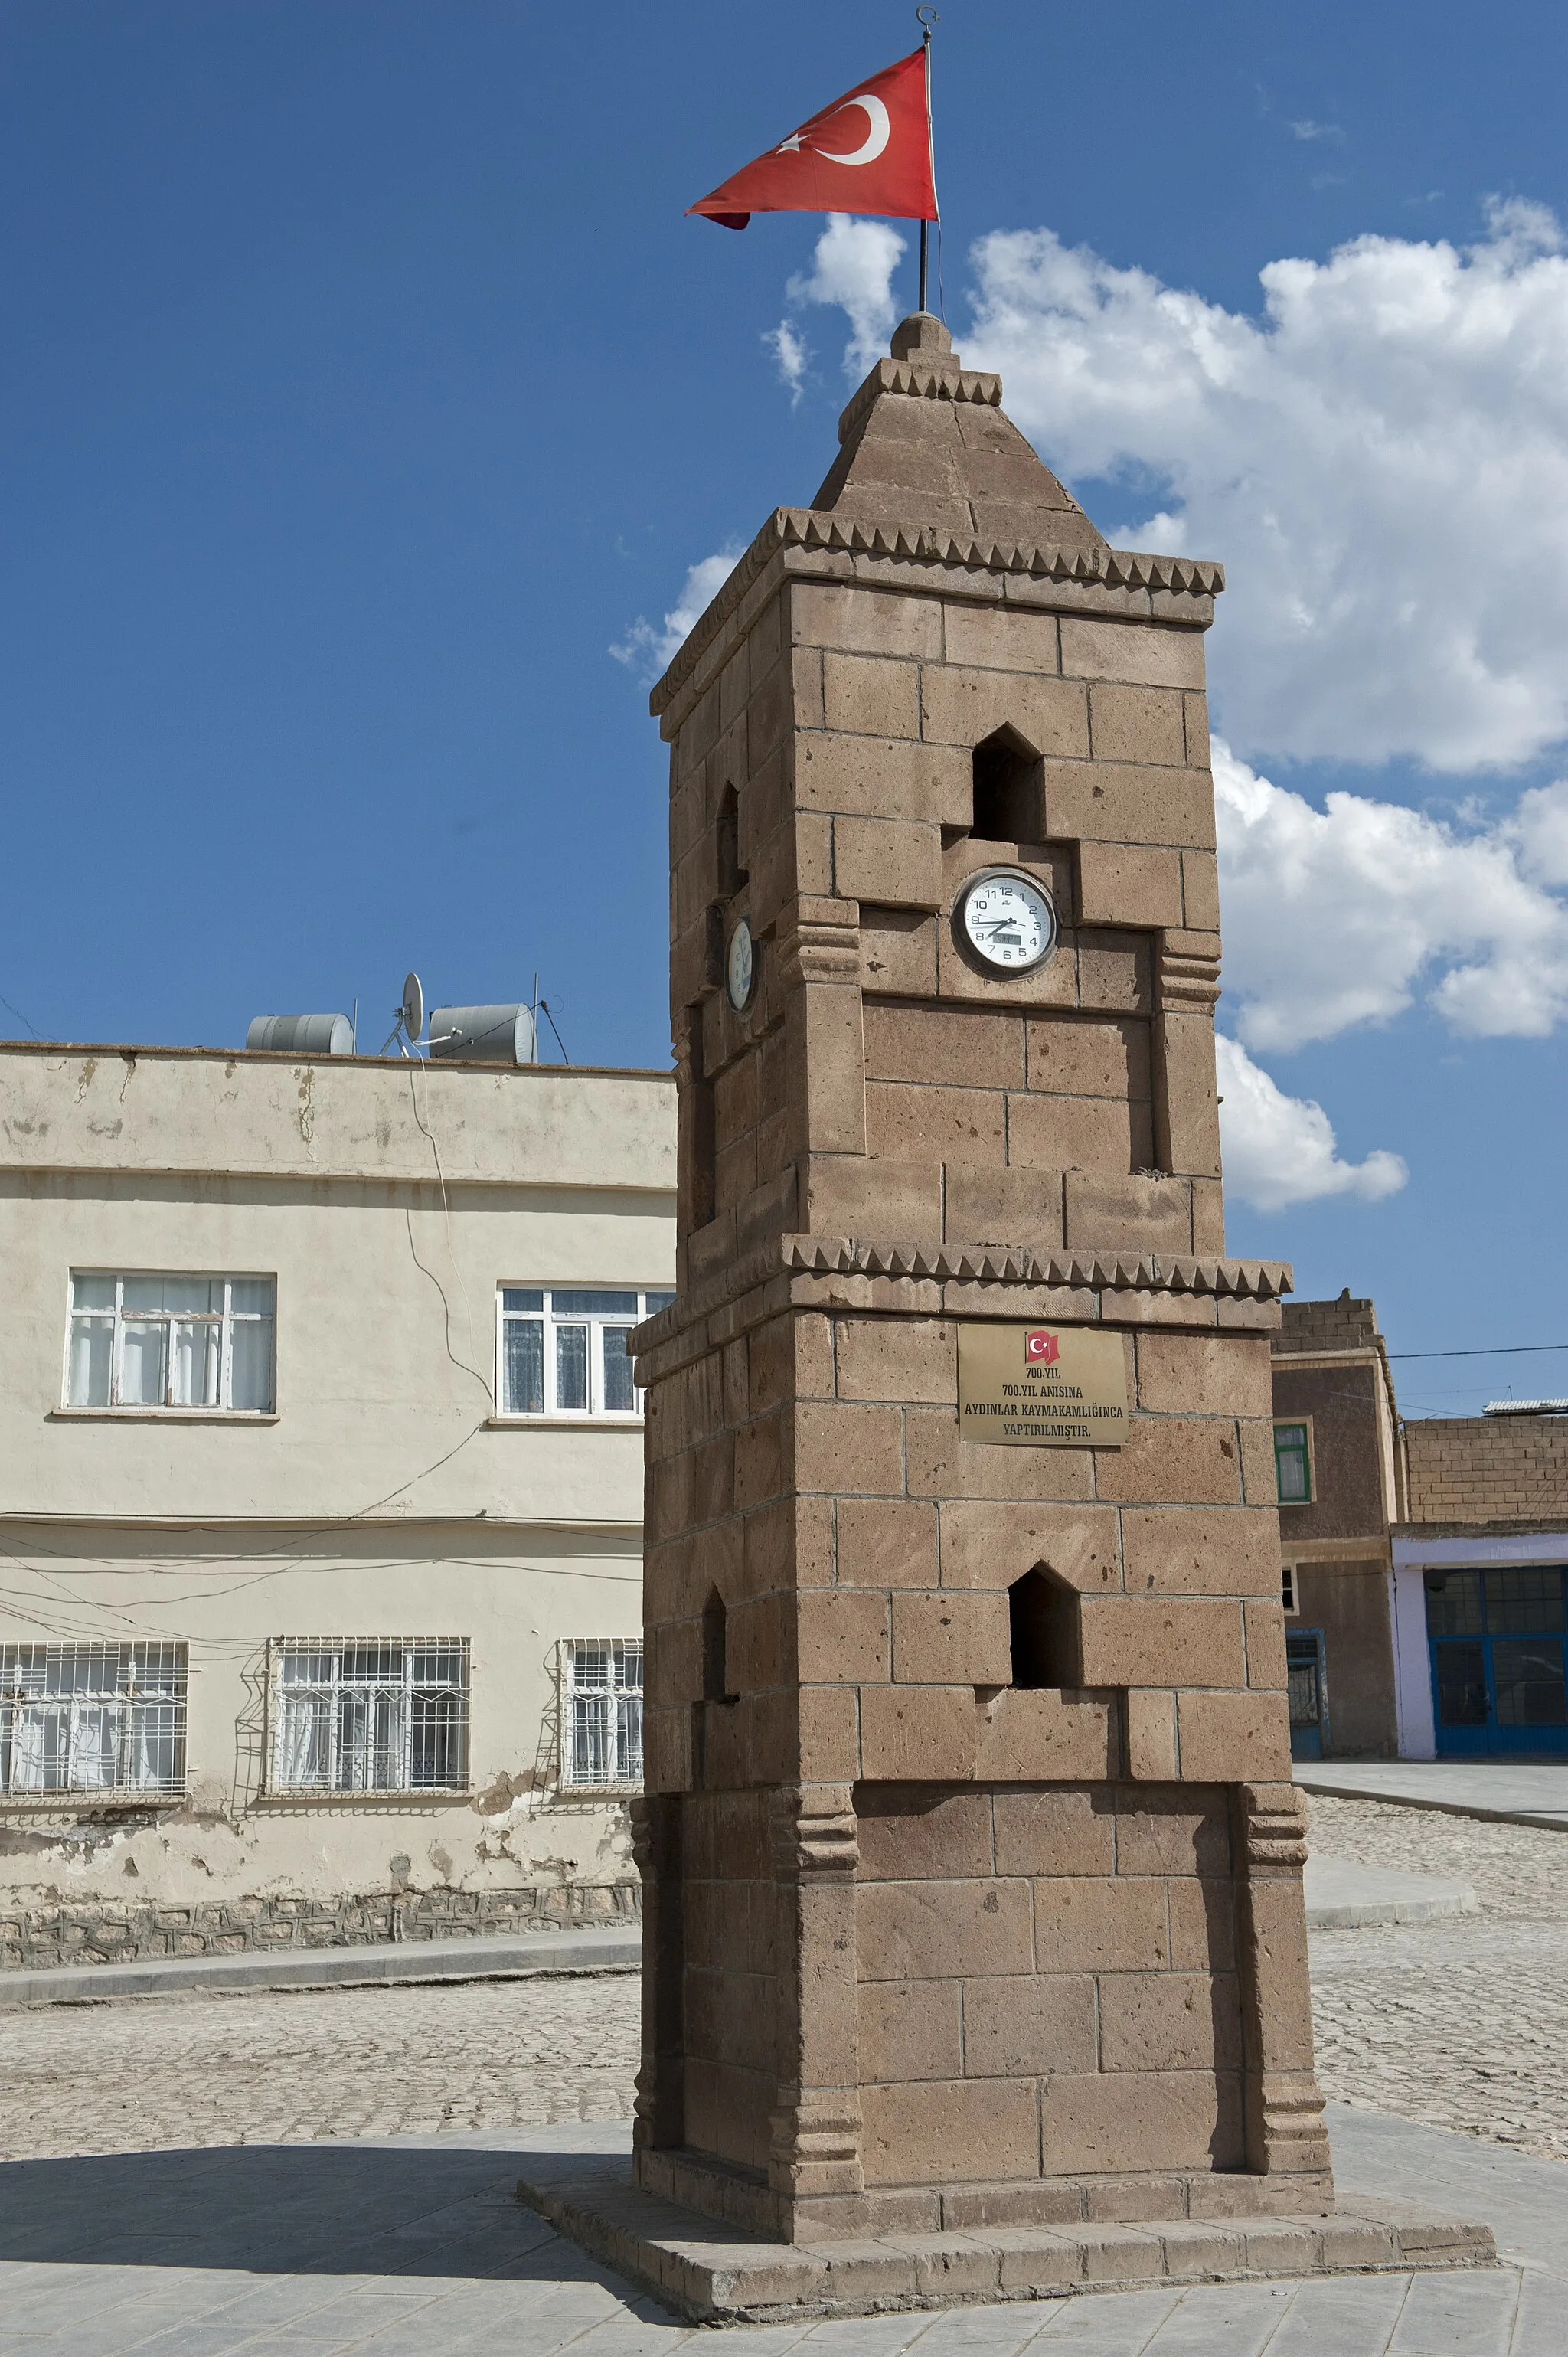 Photo showing: A clock tower seems to be an essential part of city architecture, this one is recent (founded at the 700th birthday of the town).